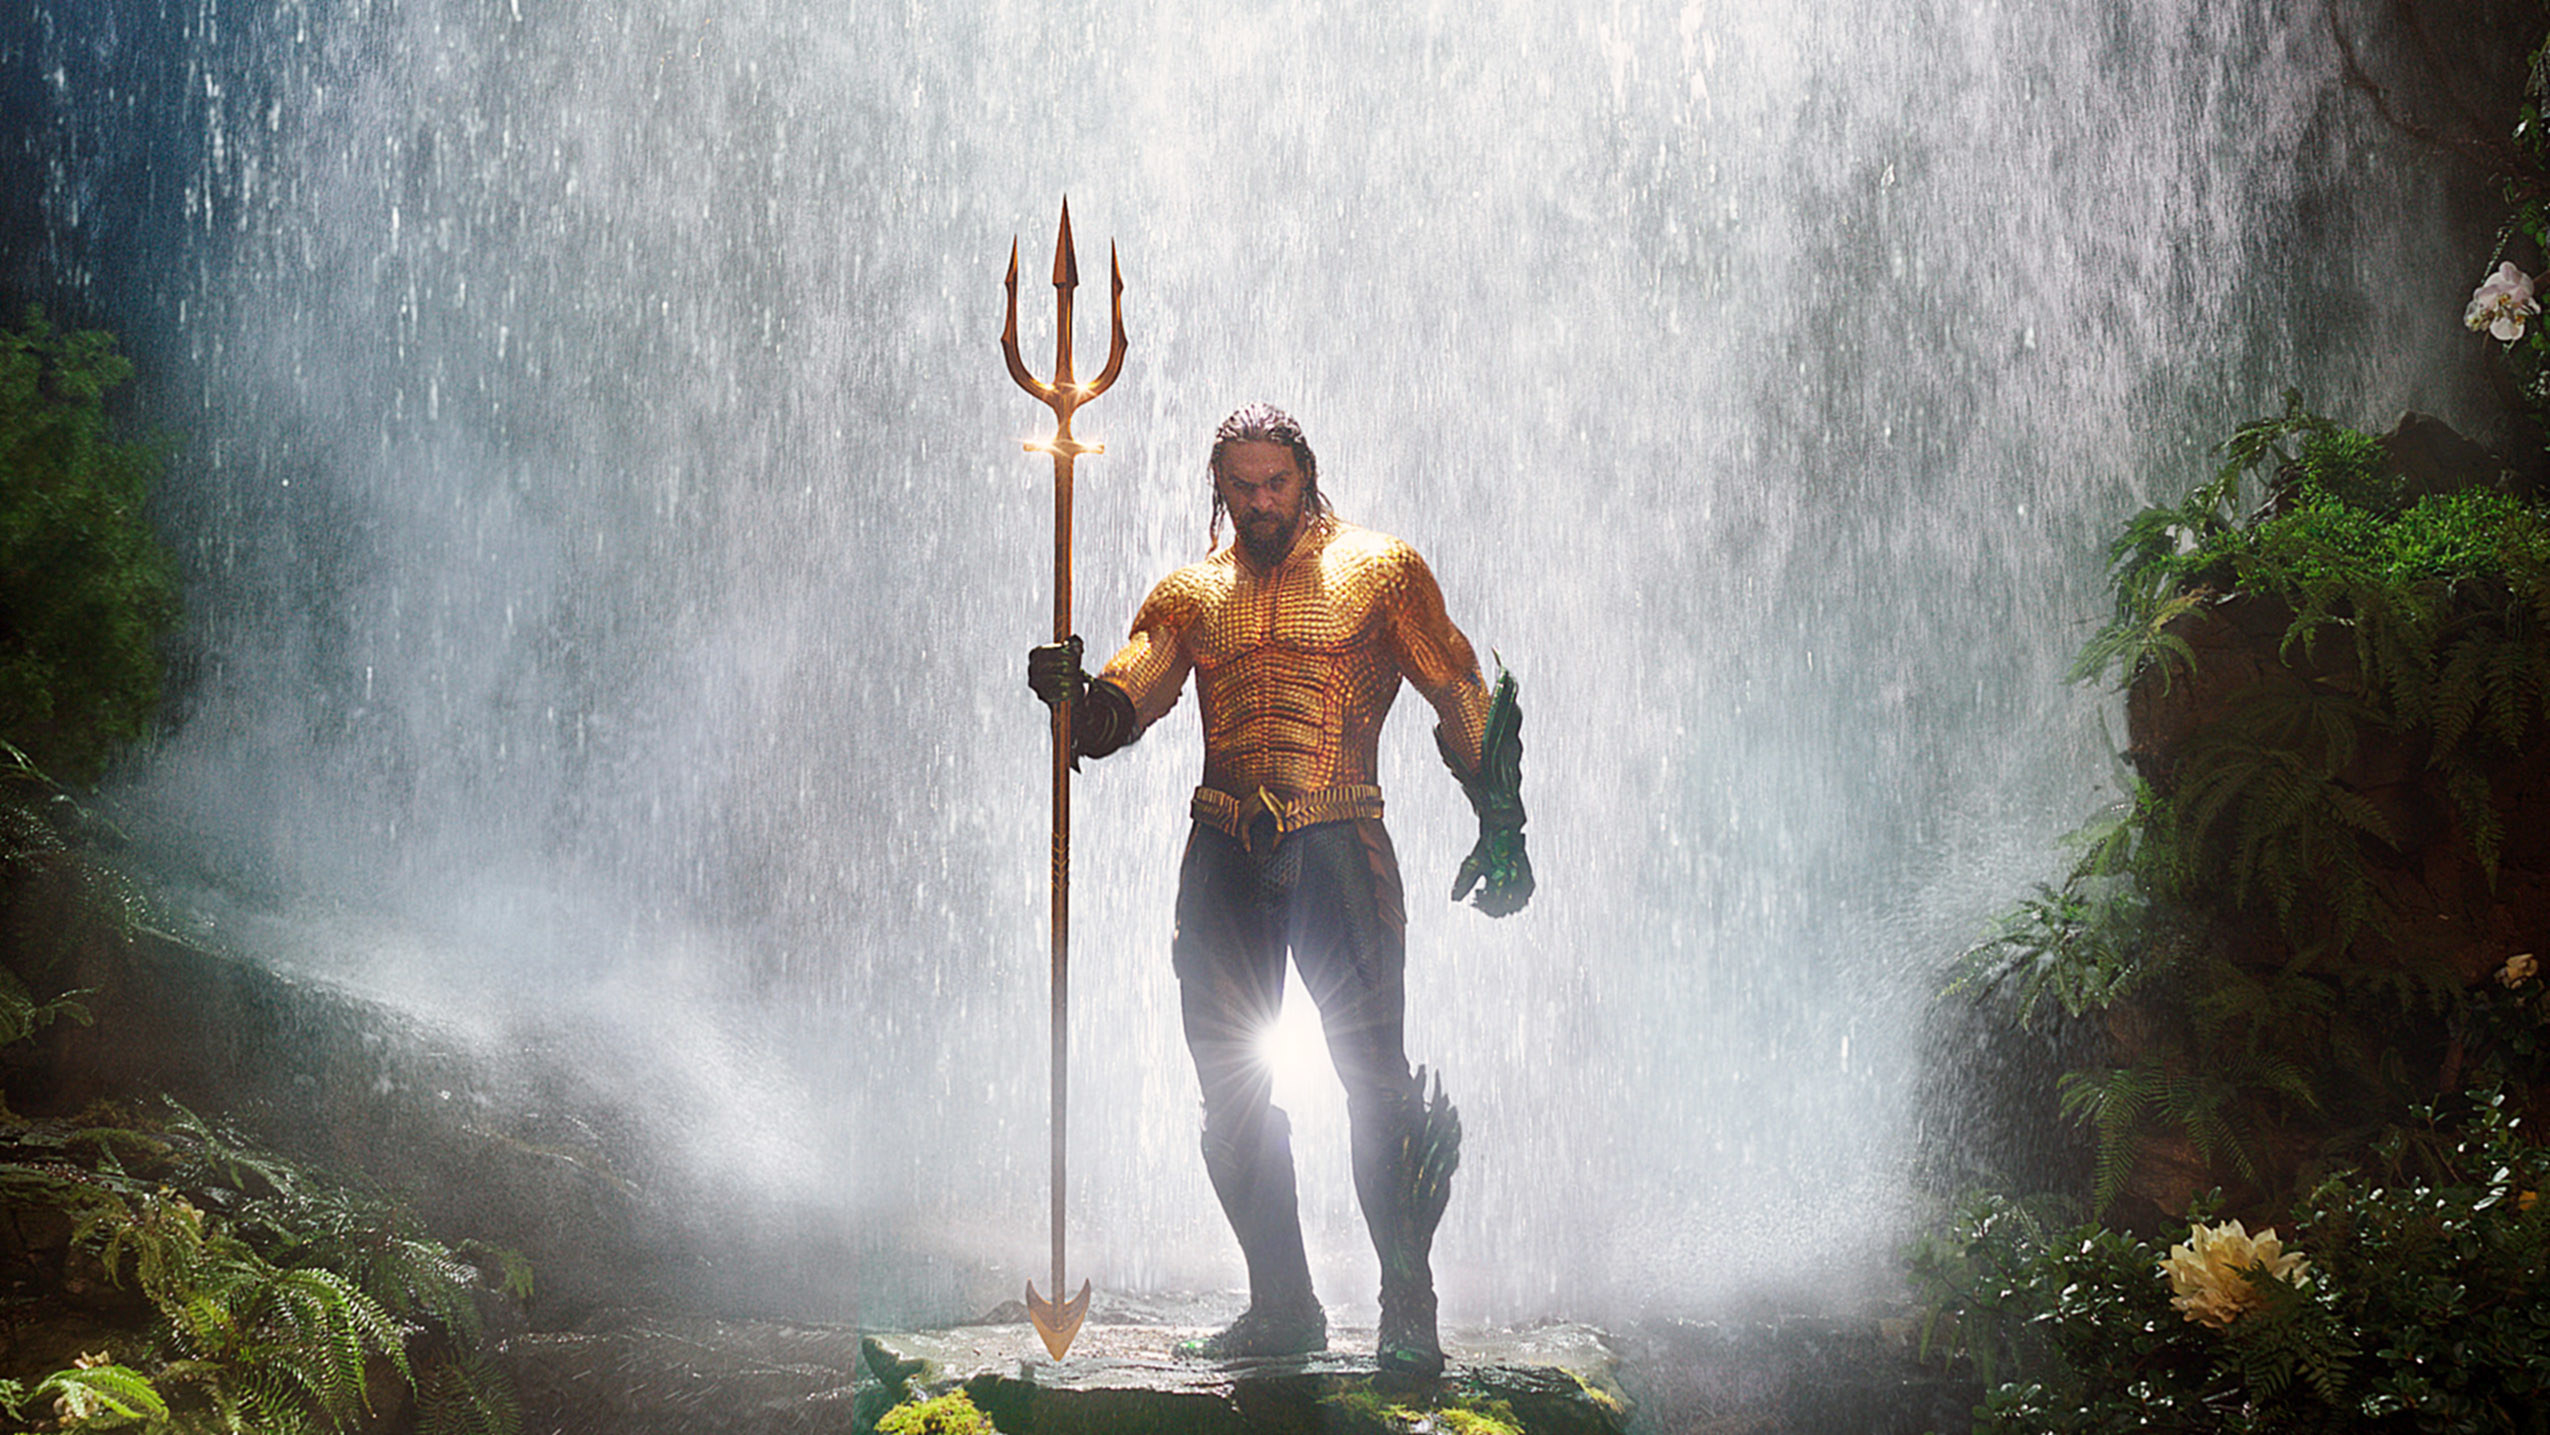 Aquaman holding a trident in front of a waterfall